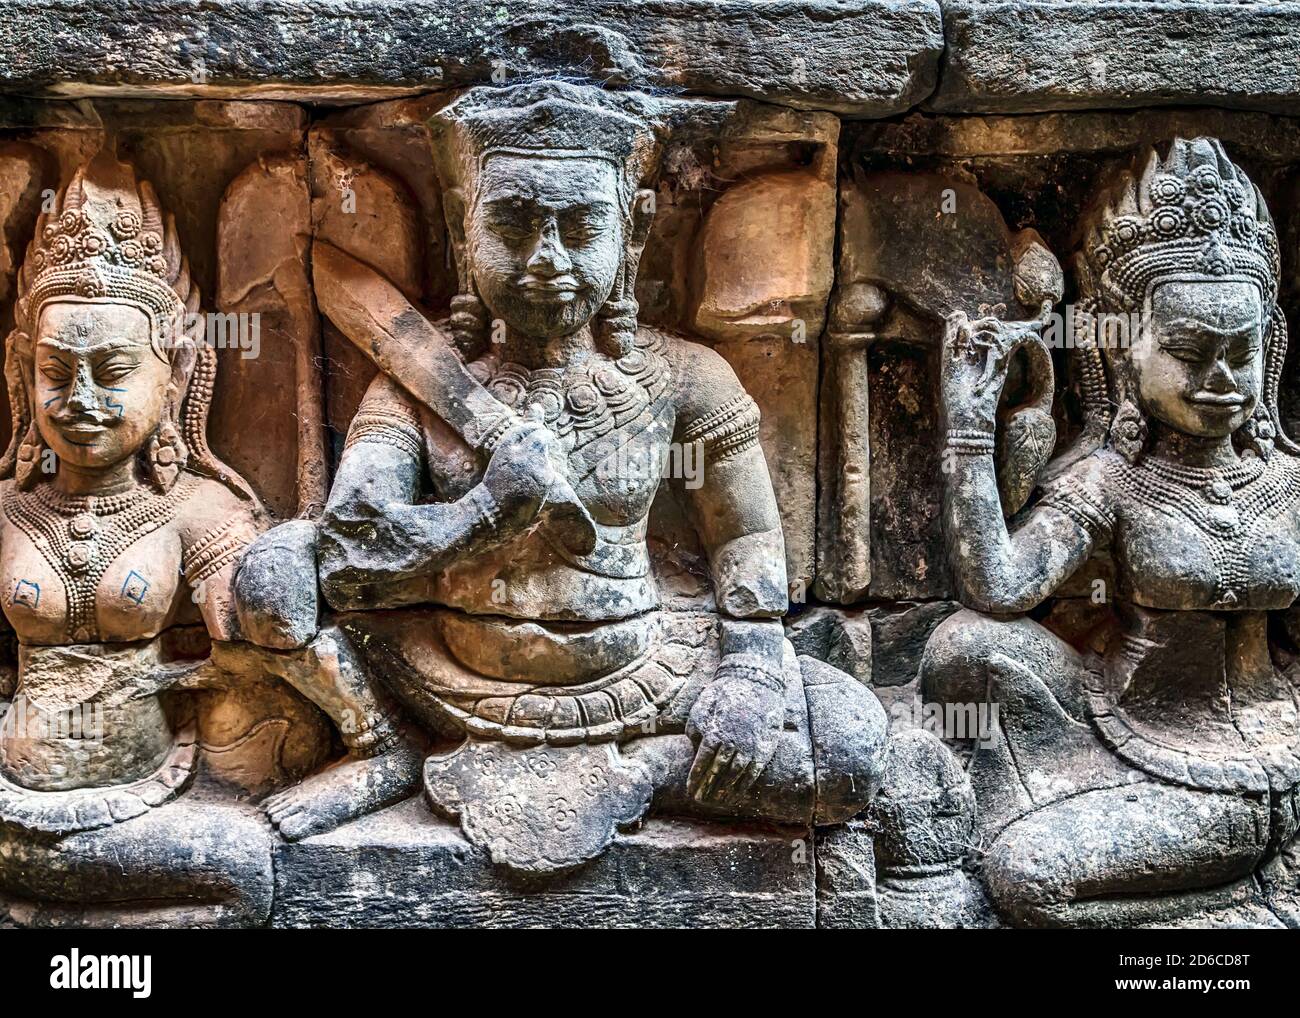 Bas reliefs ruin indian avatar god carving Khmer art temple ancient city of  complex Angkor Cambodia Stock Photo - Alamy